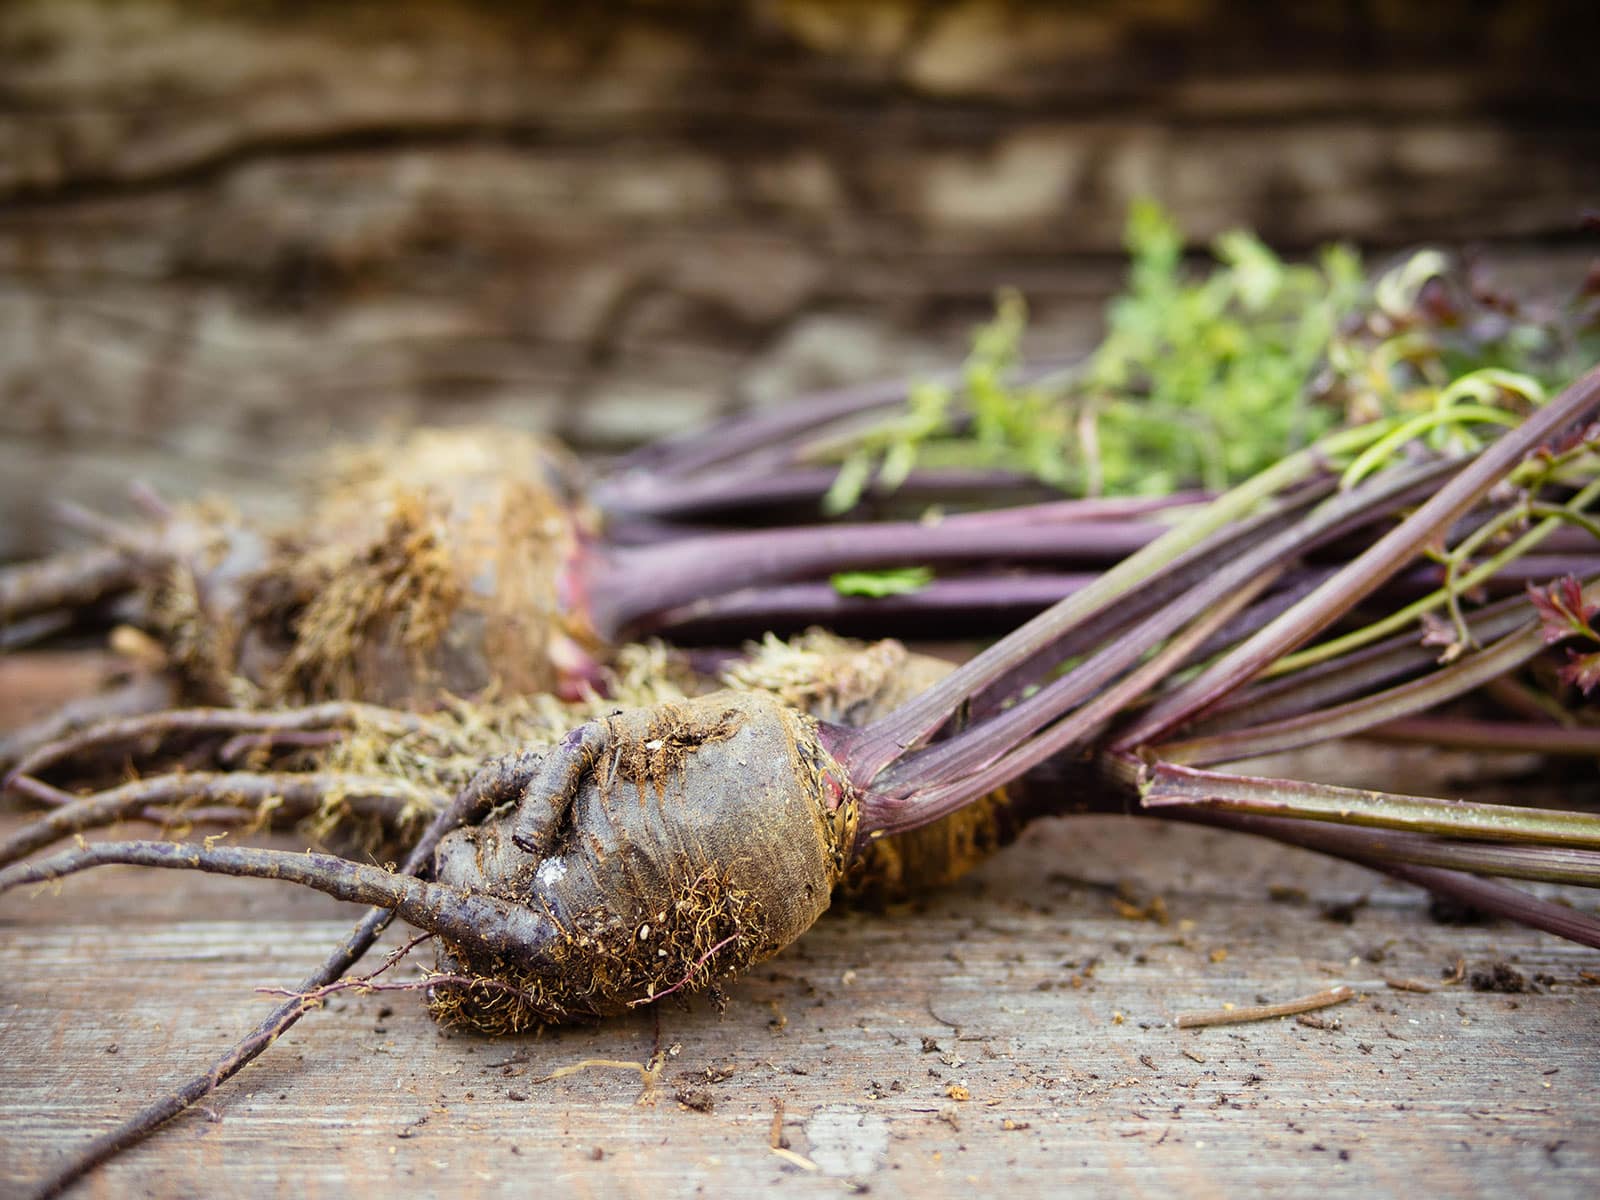 Freshly harvested dark purple carrots showing signs of root-knot nematode damage: stunted growth, forked roots, and excessive root branching